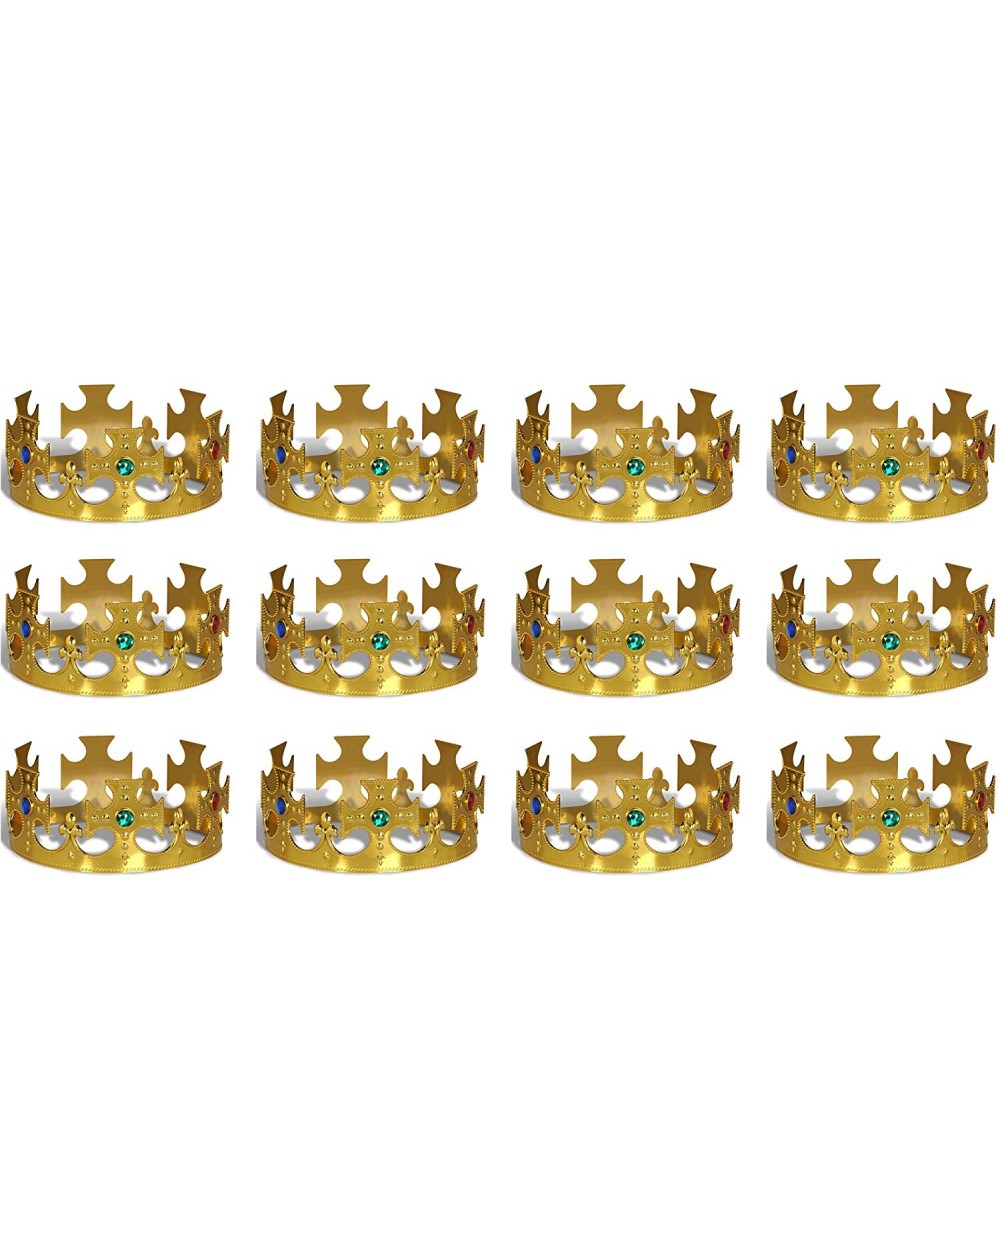 Hats 60250-GD 12-Pack Gold Plastic Jeweled King's Crown - C311HVJWIZZ $29.56